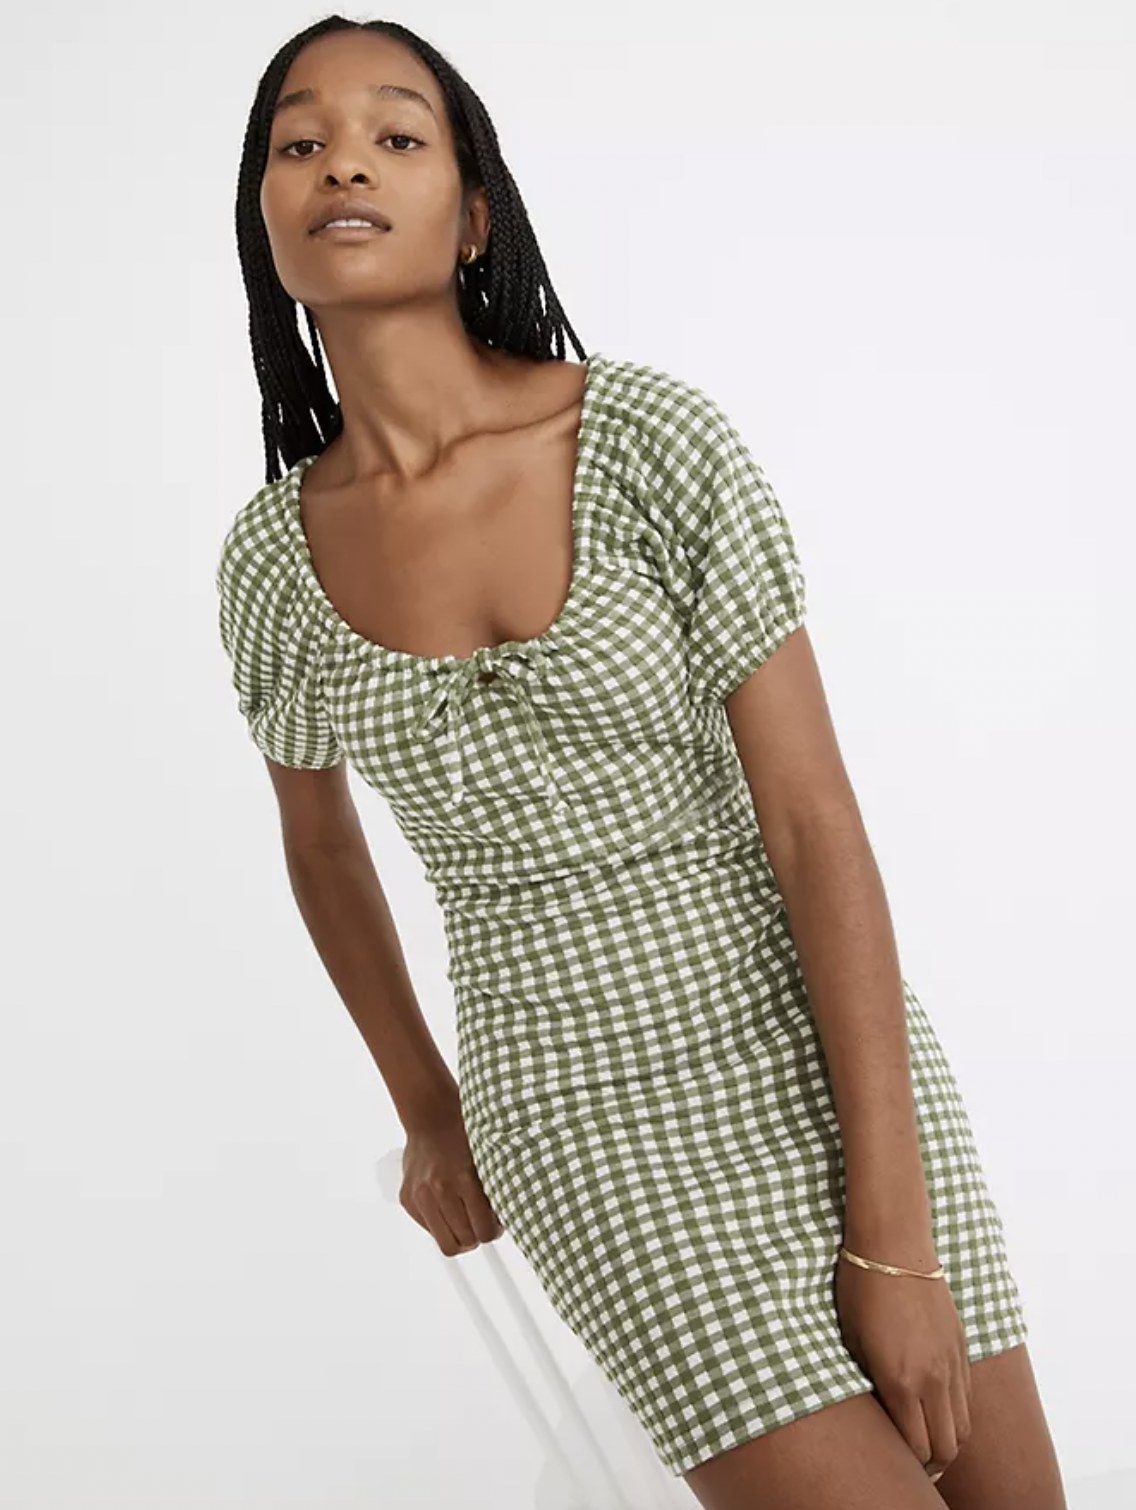 model wearing the green and white gingham dress